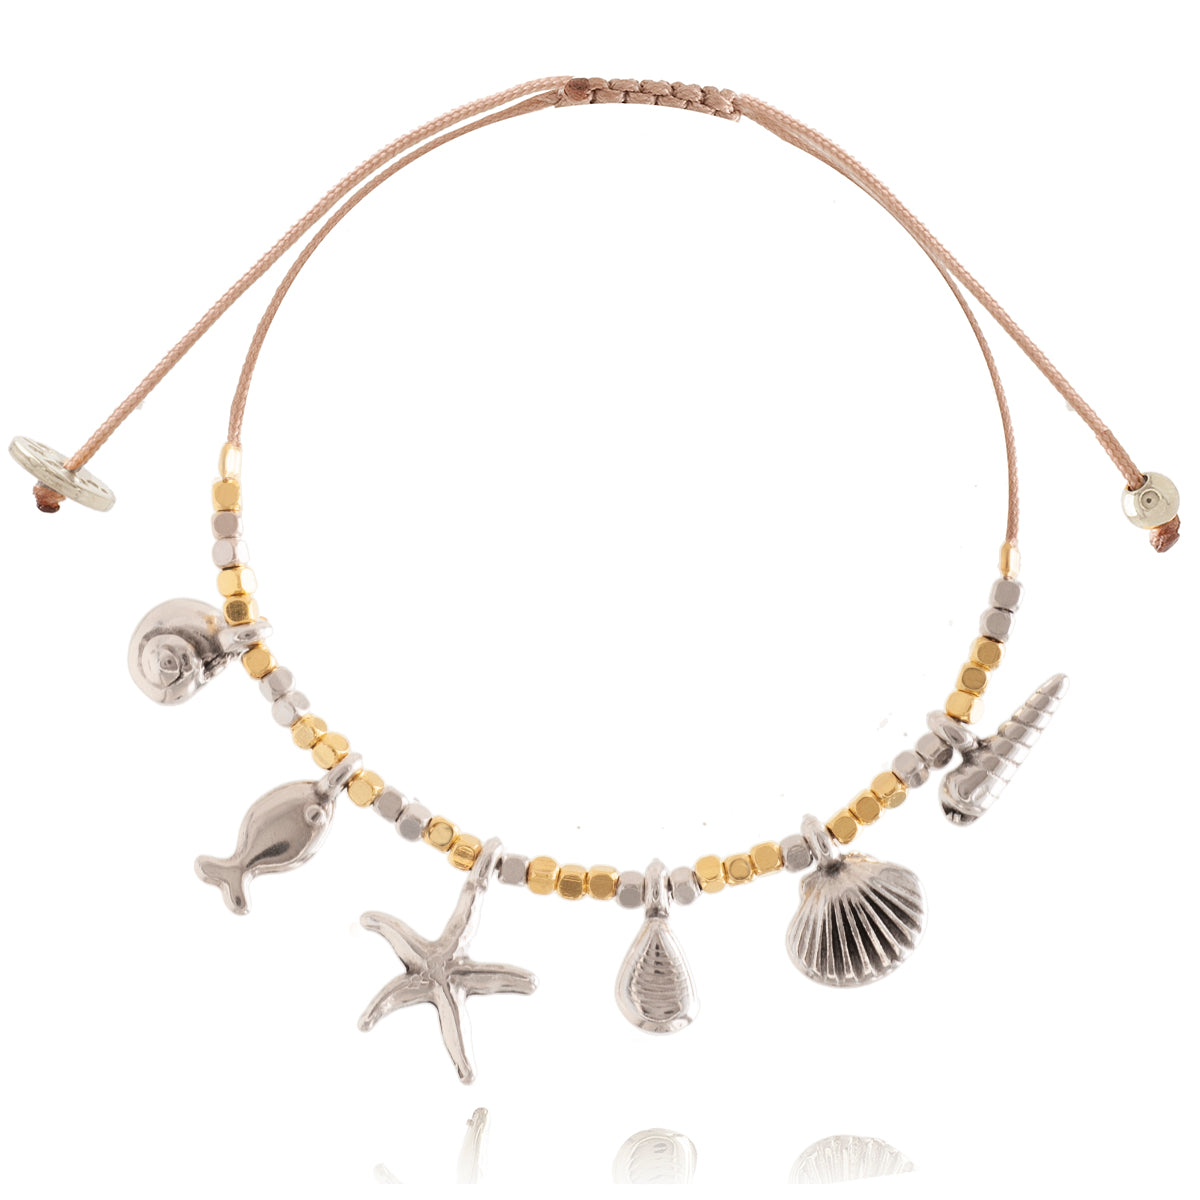 Adjustable cord bracelet with Sea Charms & Gold Nuggets